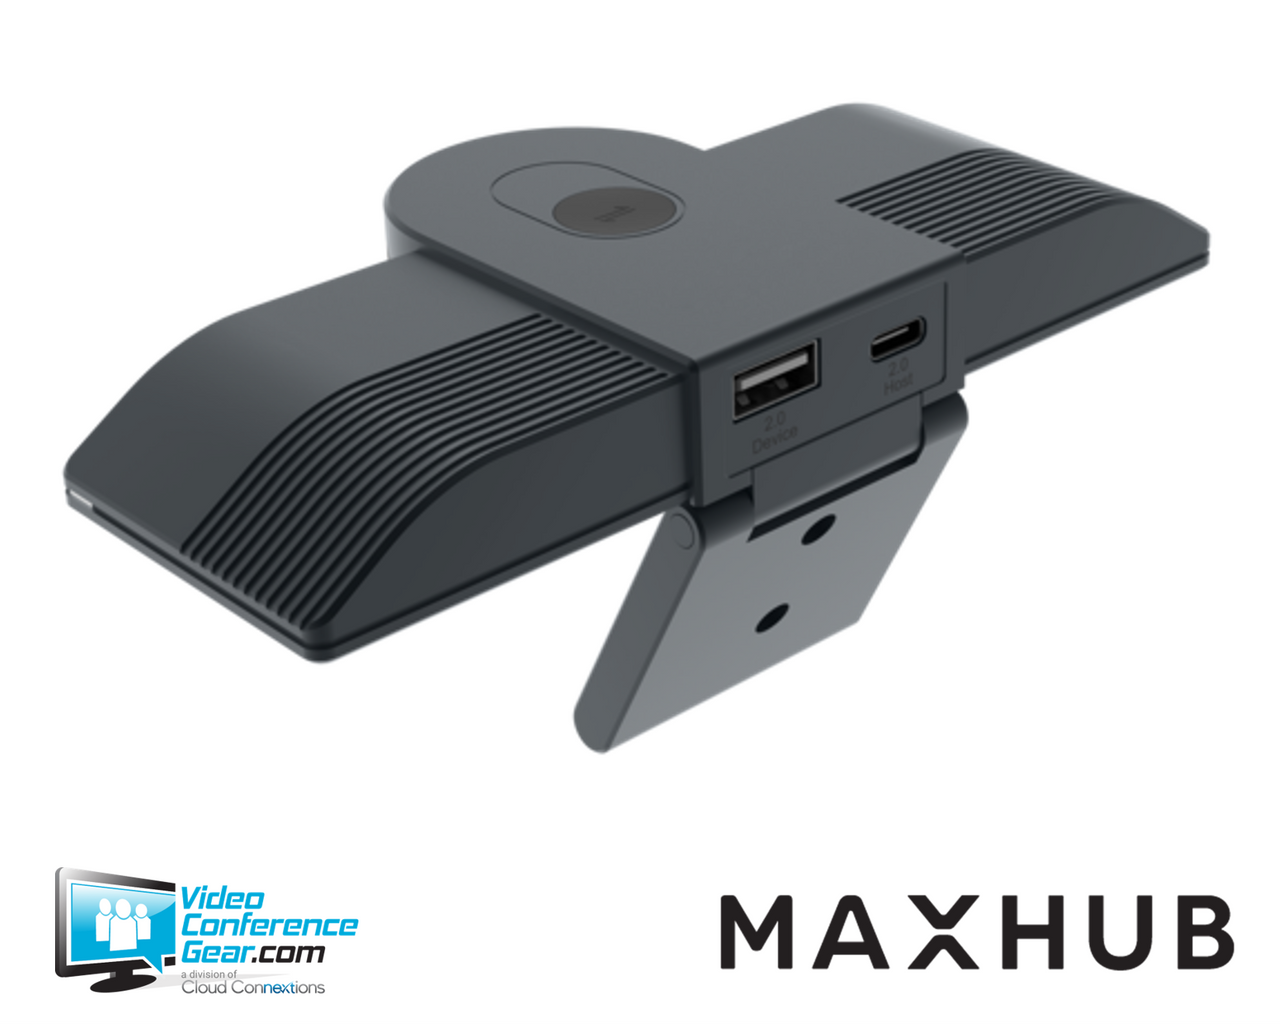 MAXHUB UC M31 4K Camera with 3 integrated lenses providing 180 degree Field of View